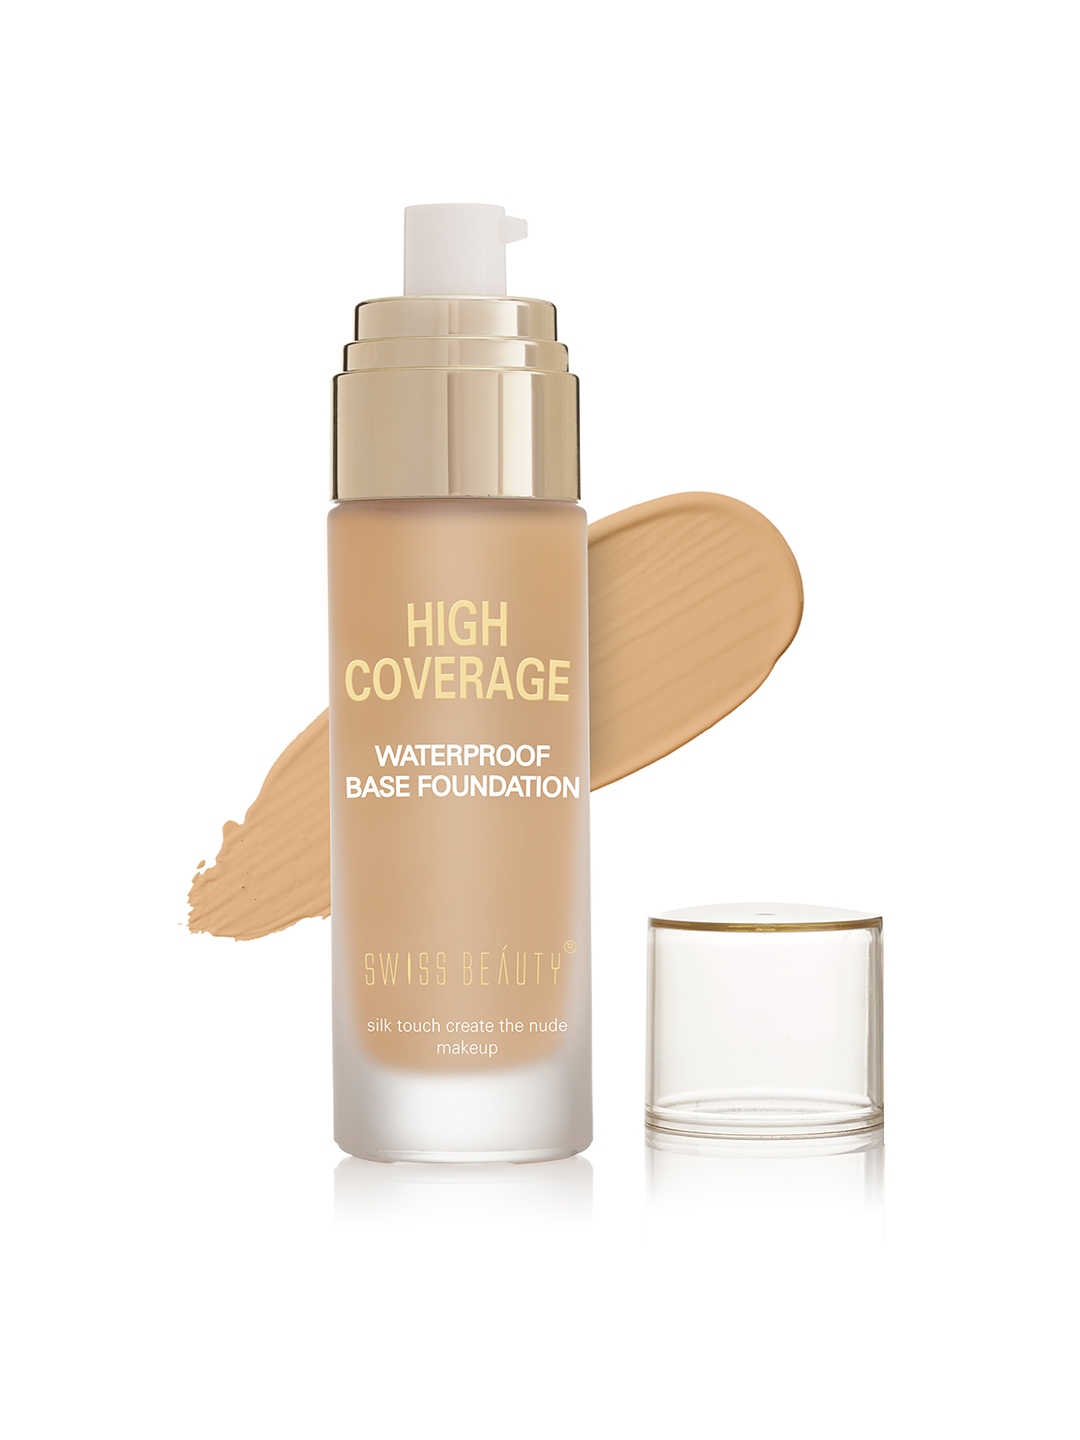 High Coverage Waterproof Base Foundation